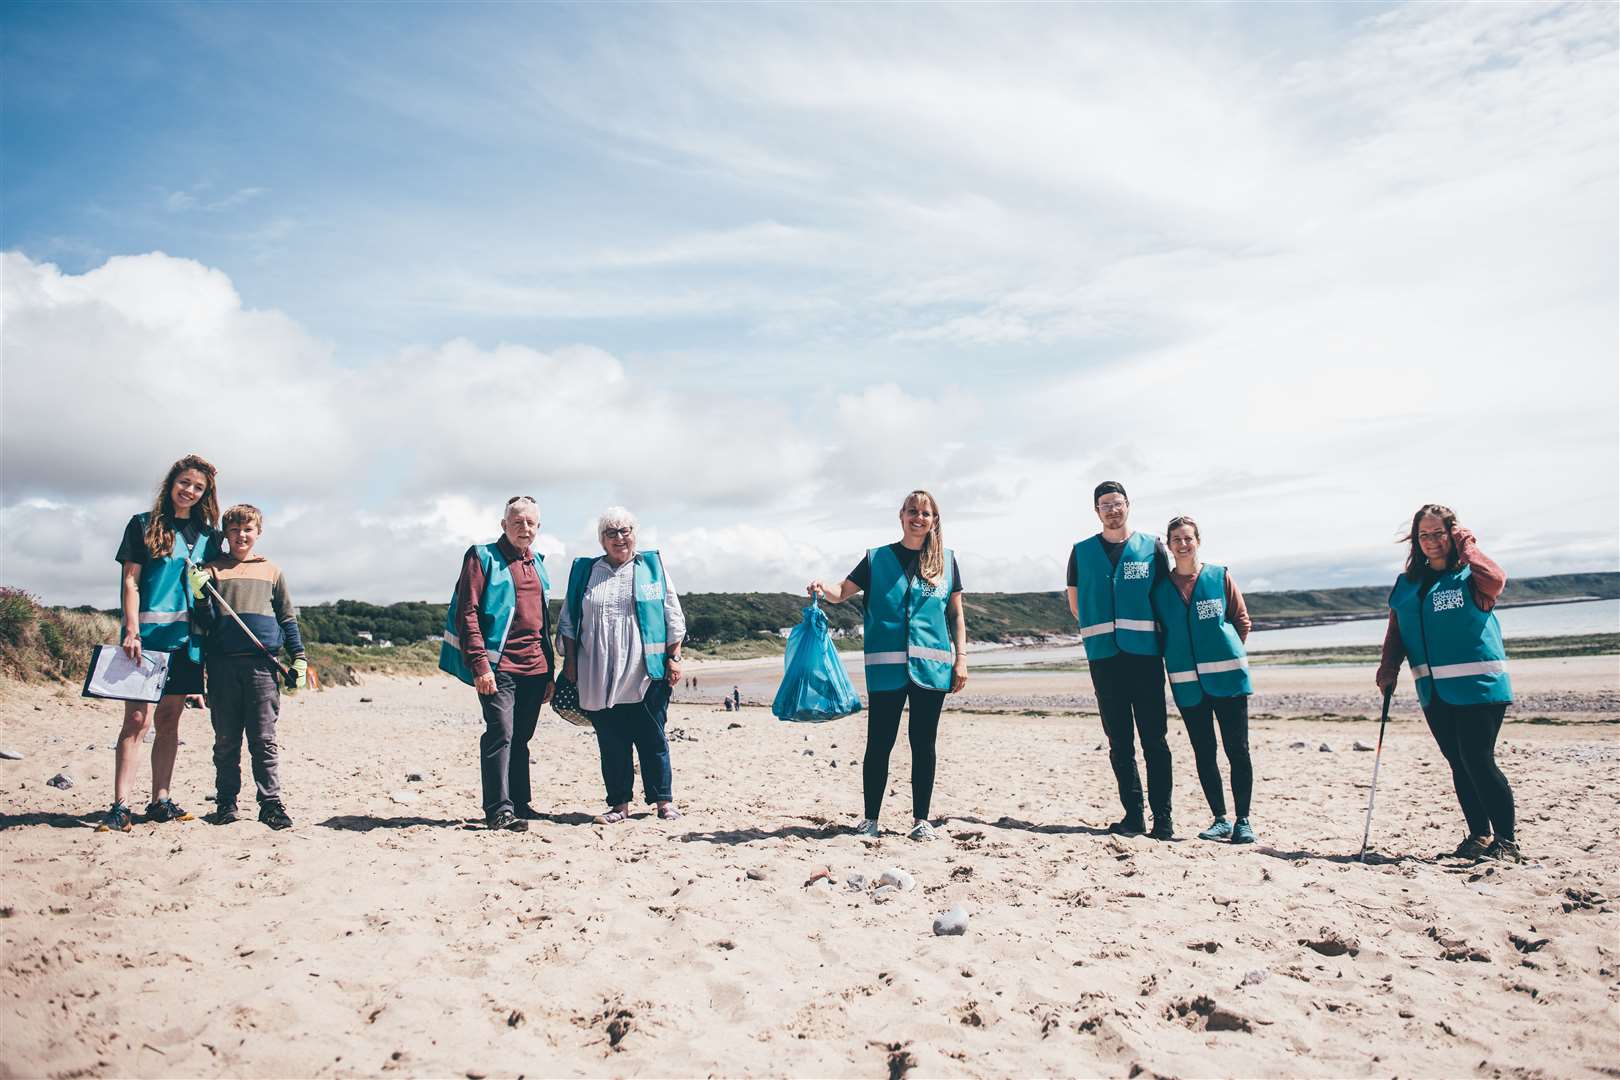 The Marine Conservation Society of volunteers taking part in their annual beach clean on Port Eynon Beach (Aled Llywelyn/Billy Barraclough/Marine Conservation Society/PA)